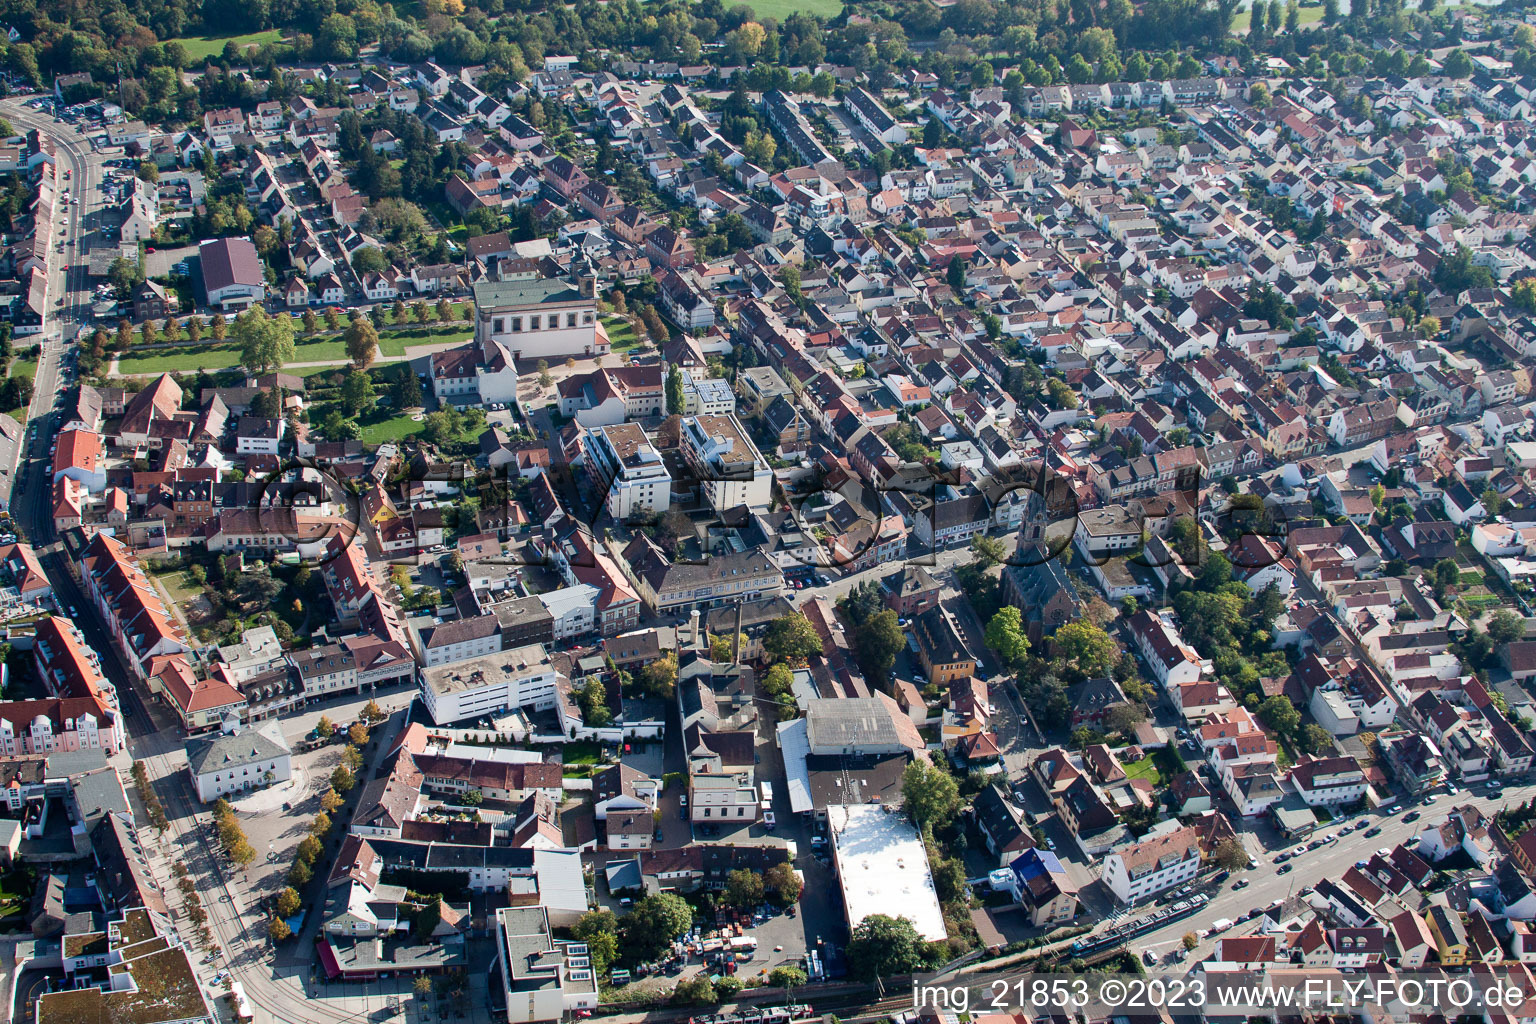 Aerial view of District Oggersheim in Ludwigshafen am Rhein in the state Rhineland-Palatinate, Germany